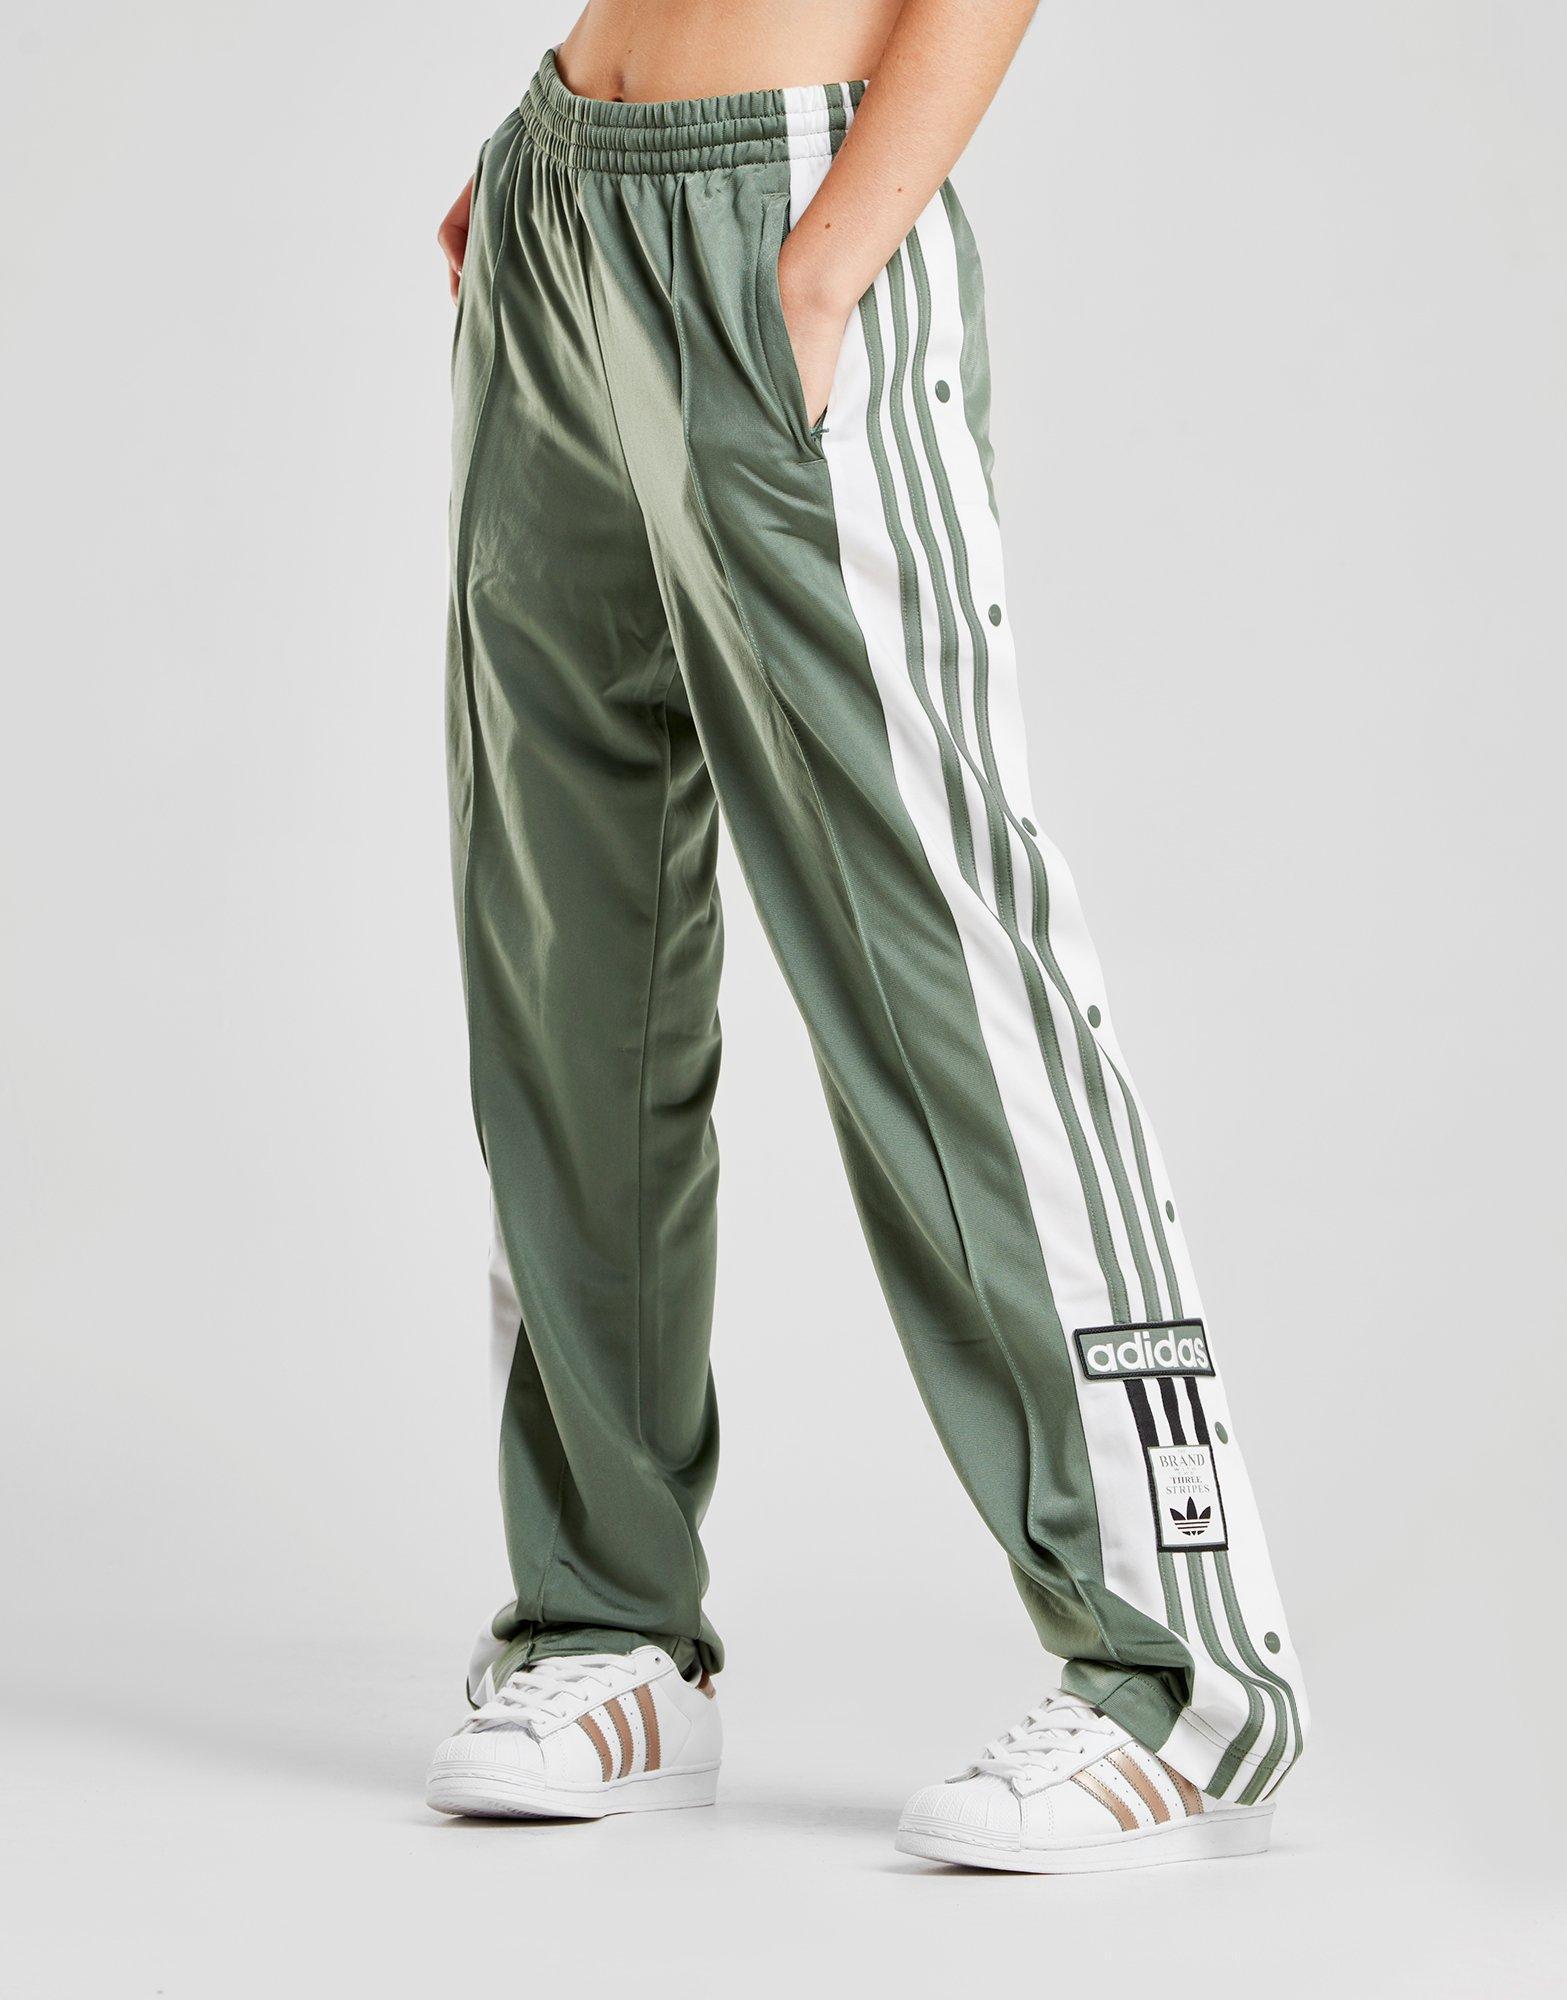 adidas Synthetic Adibreak Track Pants in Green/White (Green) - Lyst